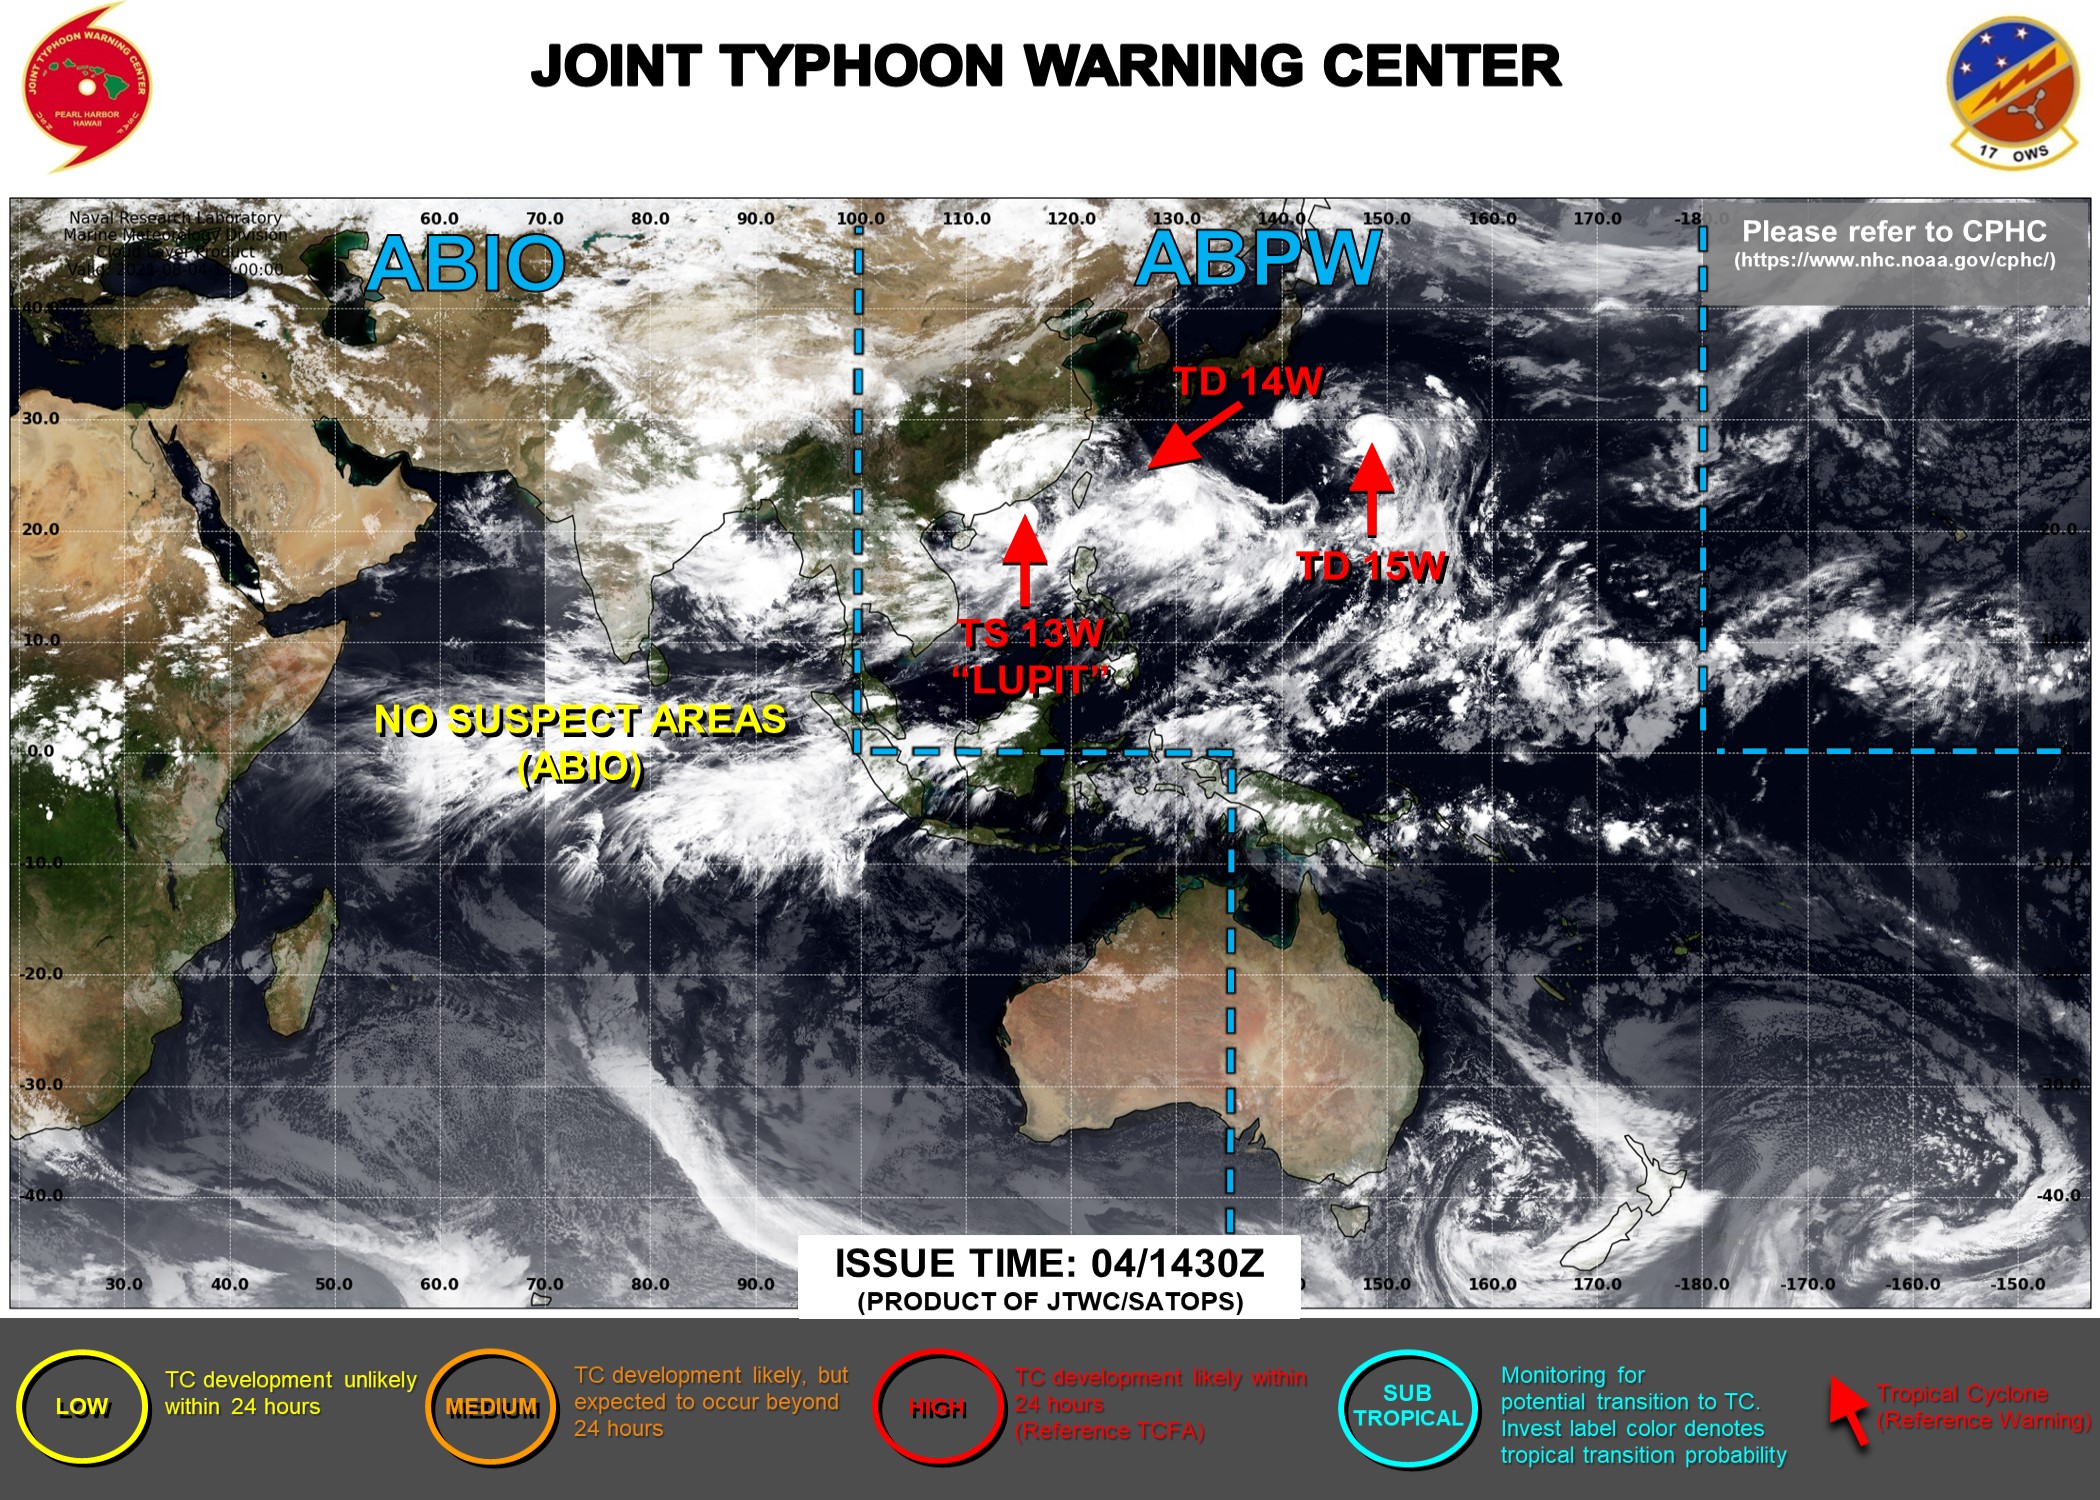 04/15UTC. JTWC ARE ISSUING 6HOURLY WARNINGS AND 3HOURLY SATELLITE BULLETINS ON 13W, 14W AND 15W.